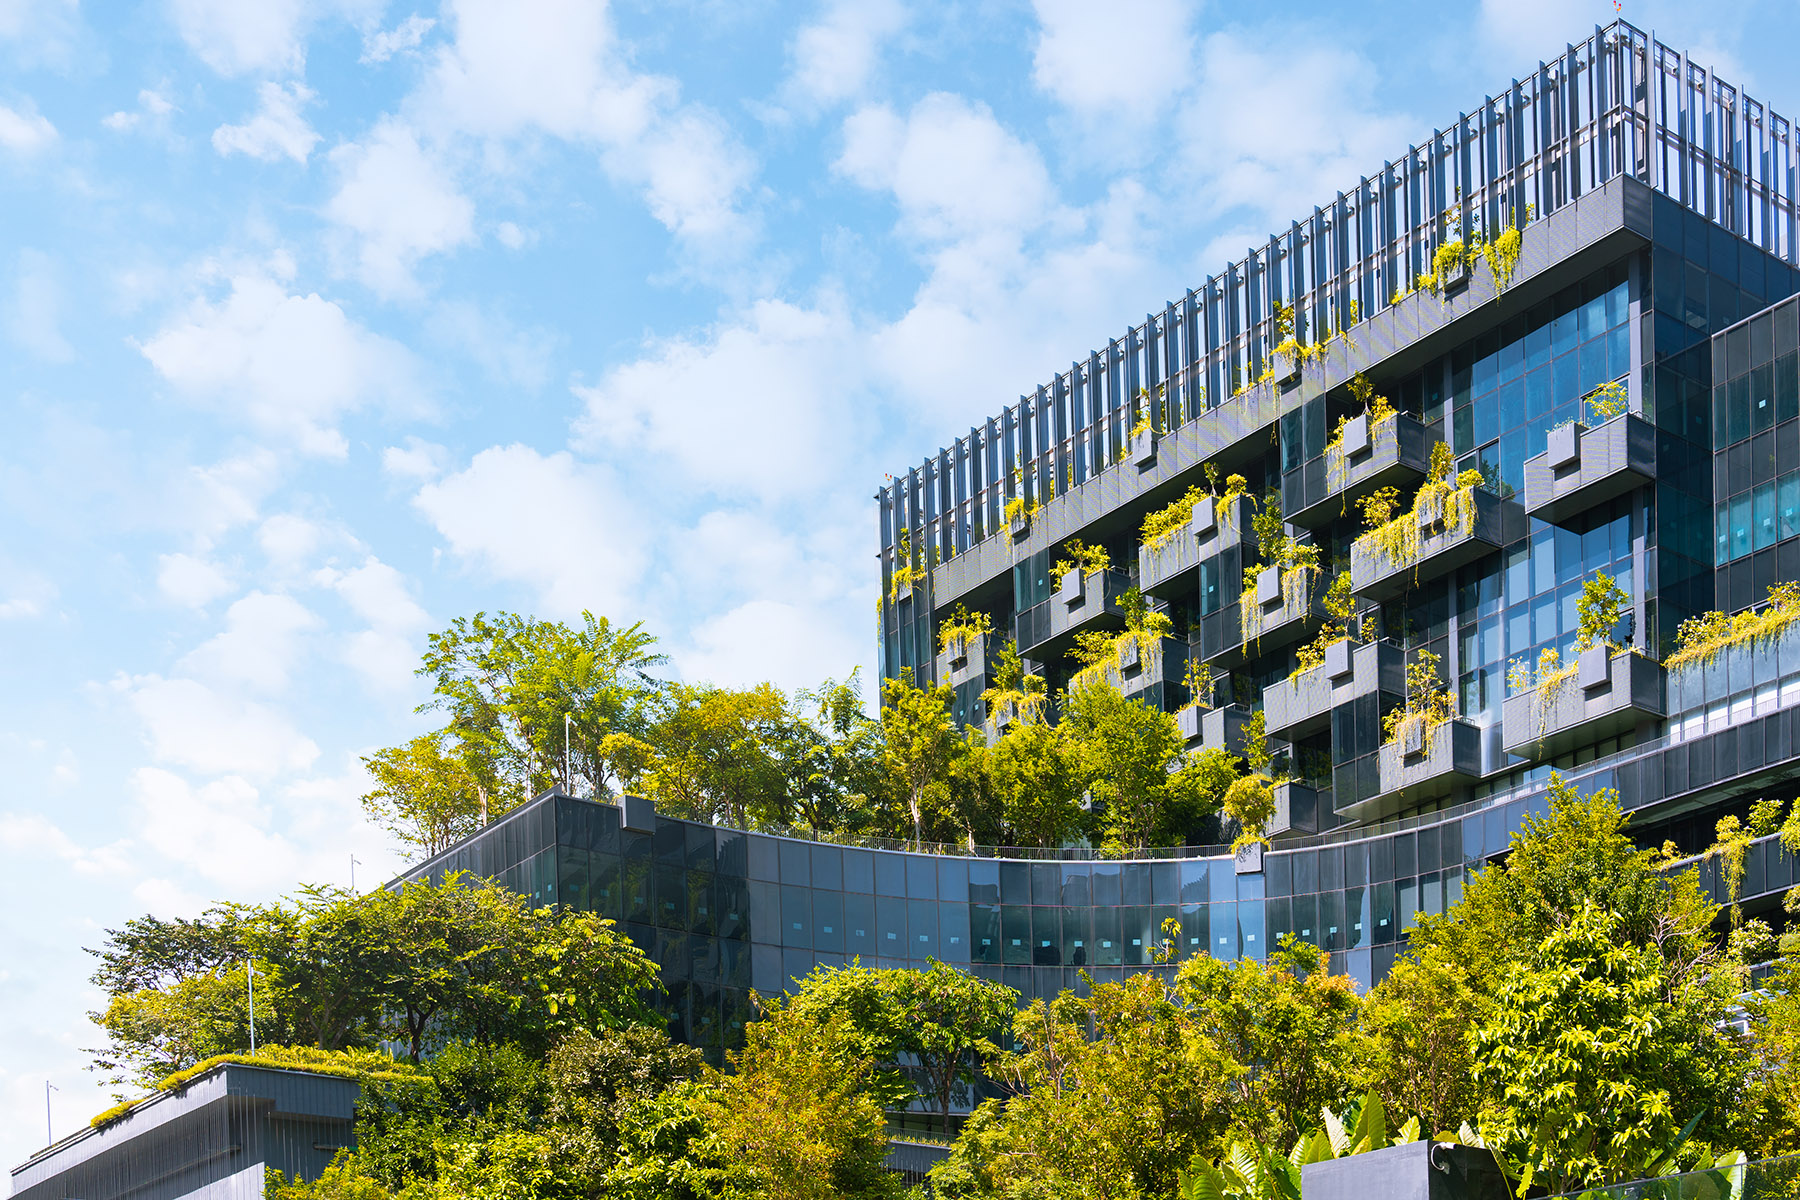 Condos in Bangkok with balcony gardens - Low angle view of building with vertical garden

